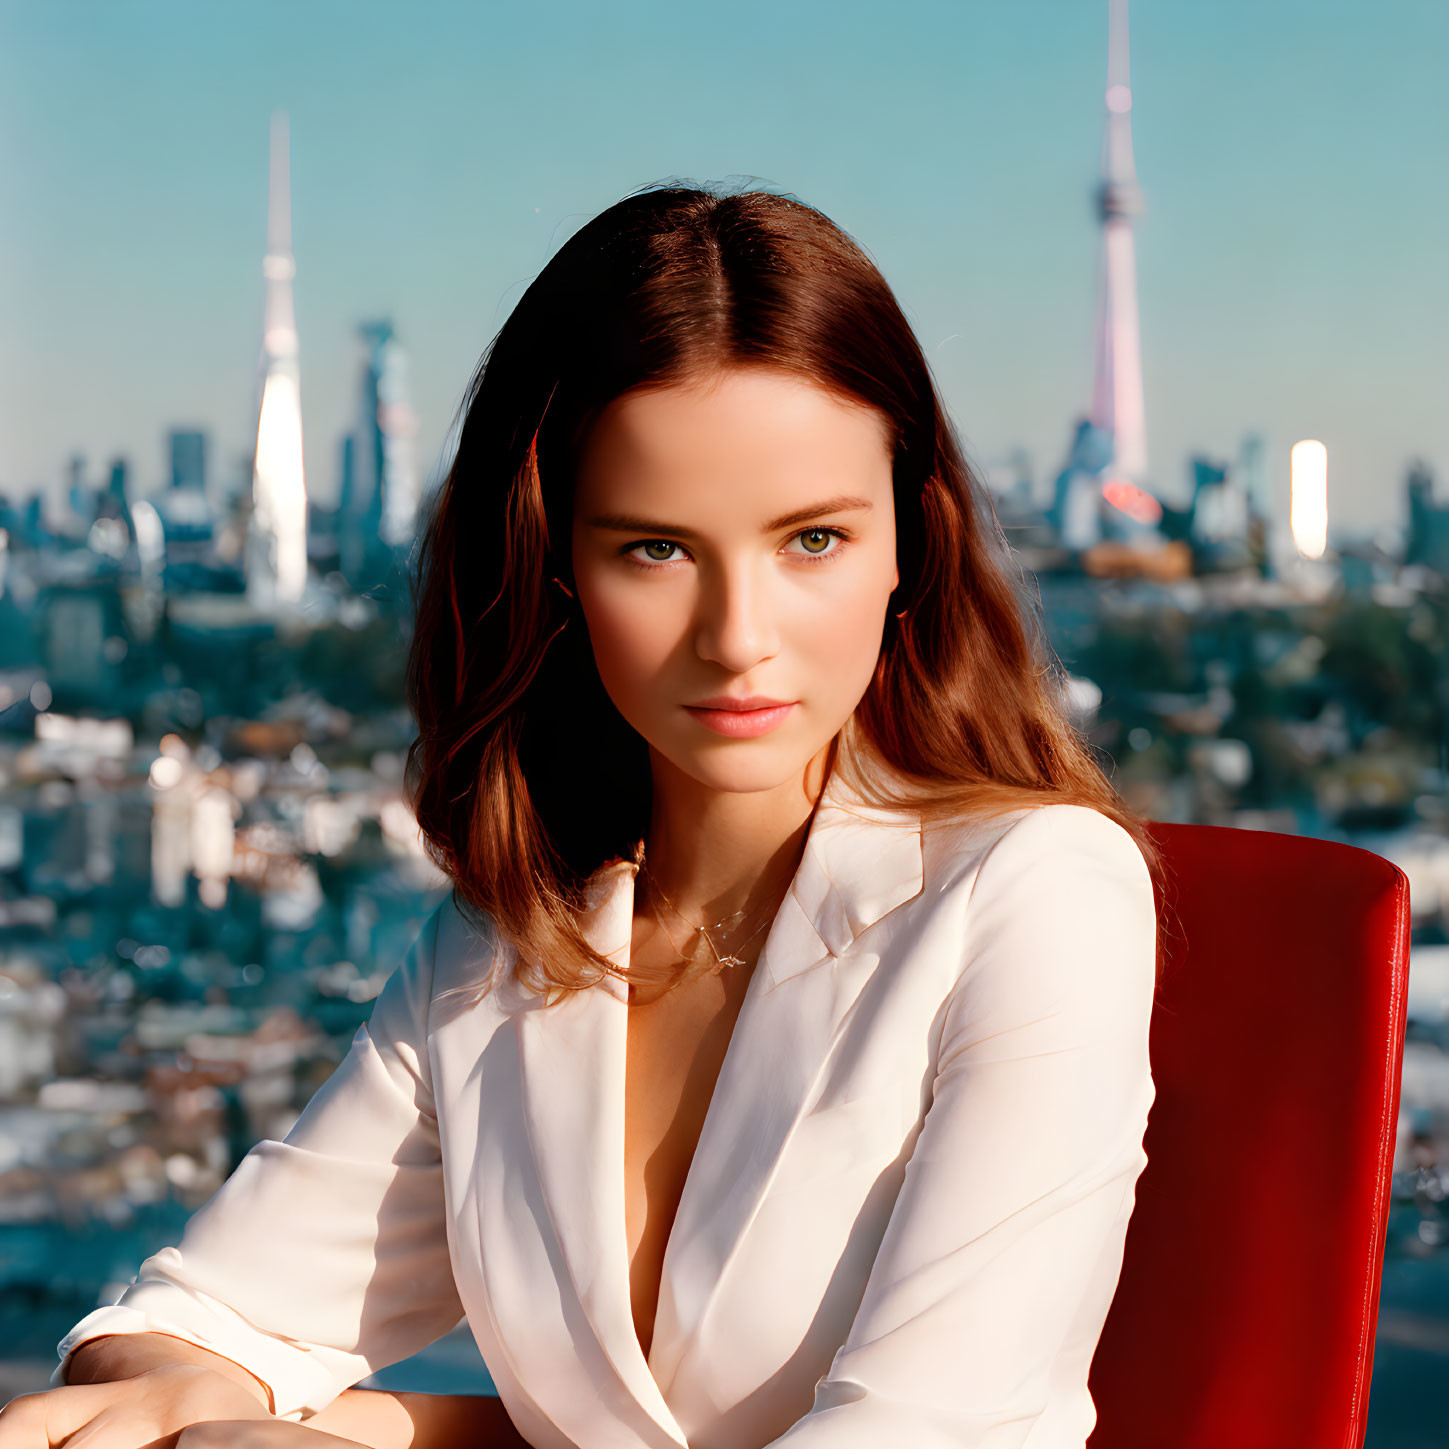 Brown-Haired Woman in White Shirt with Cityscape Background